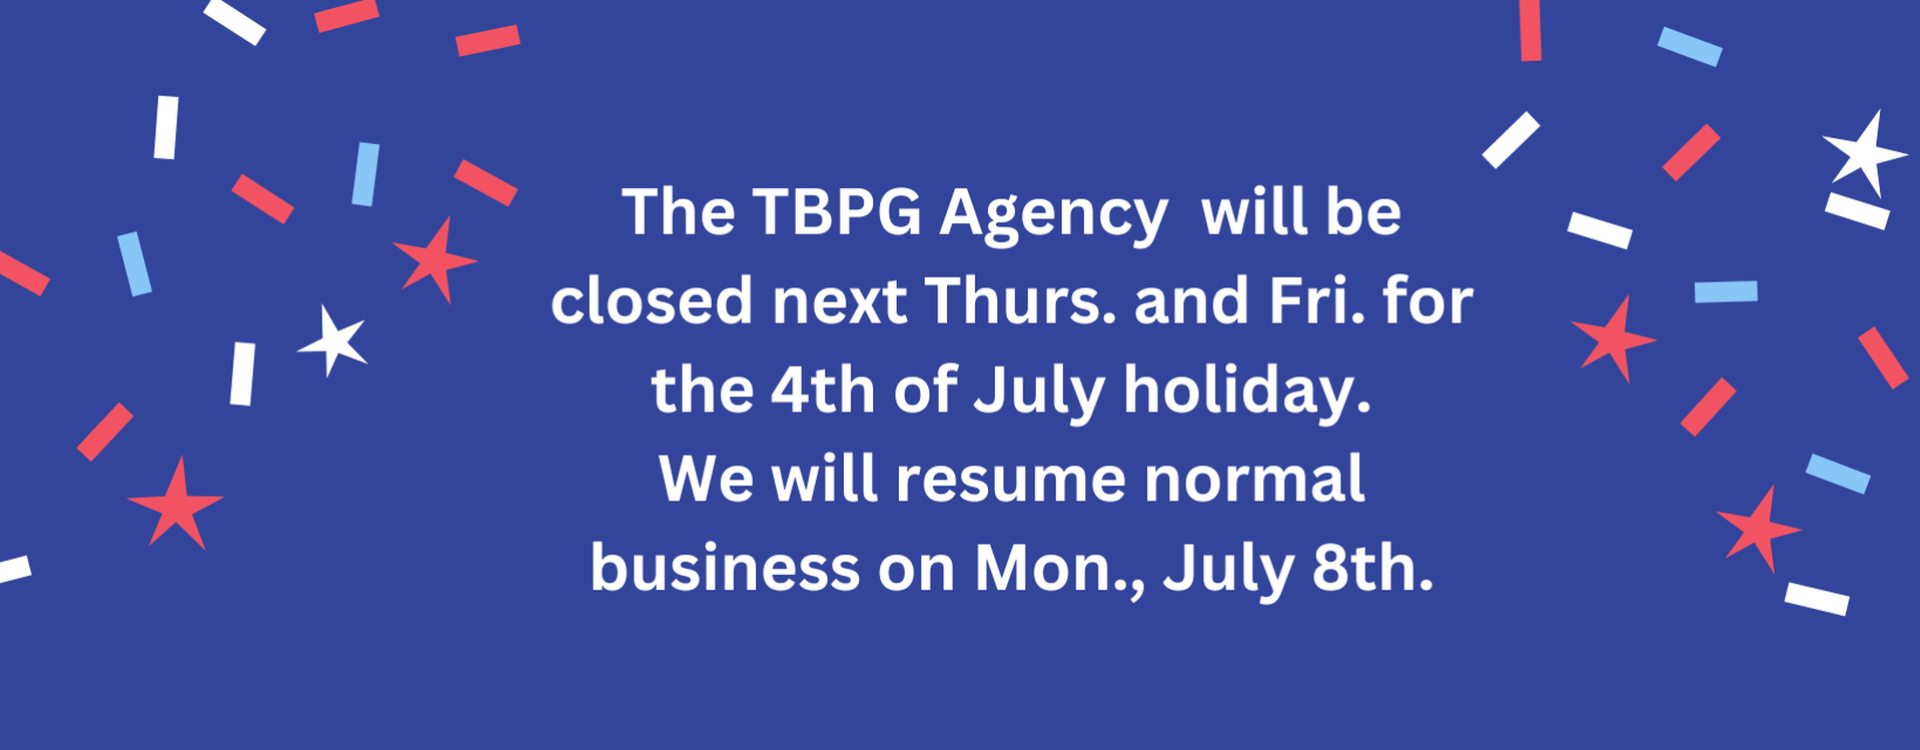 The TBPG Agency will be closed next Thurs. and Fri. for the 4th of July holiday. We will resume normal business on Mon., July 8th.